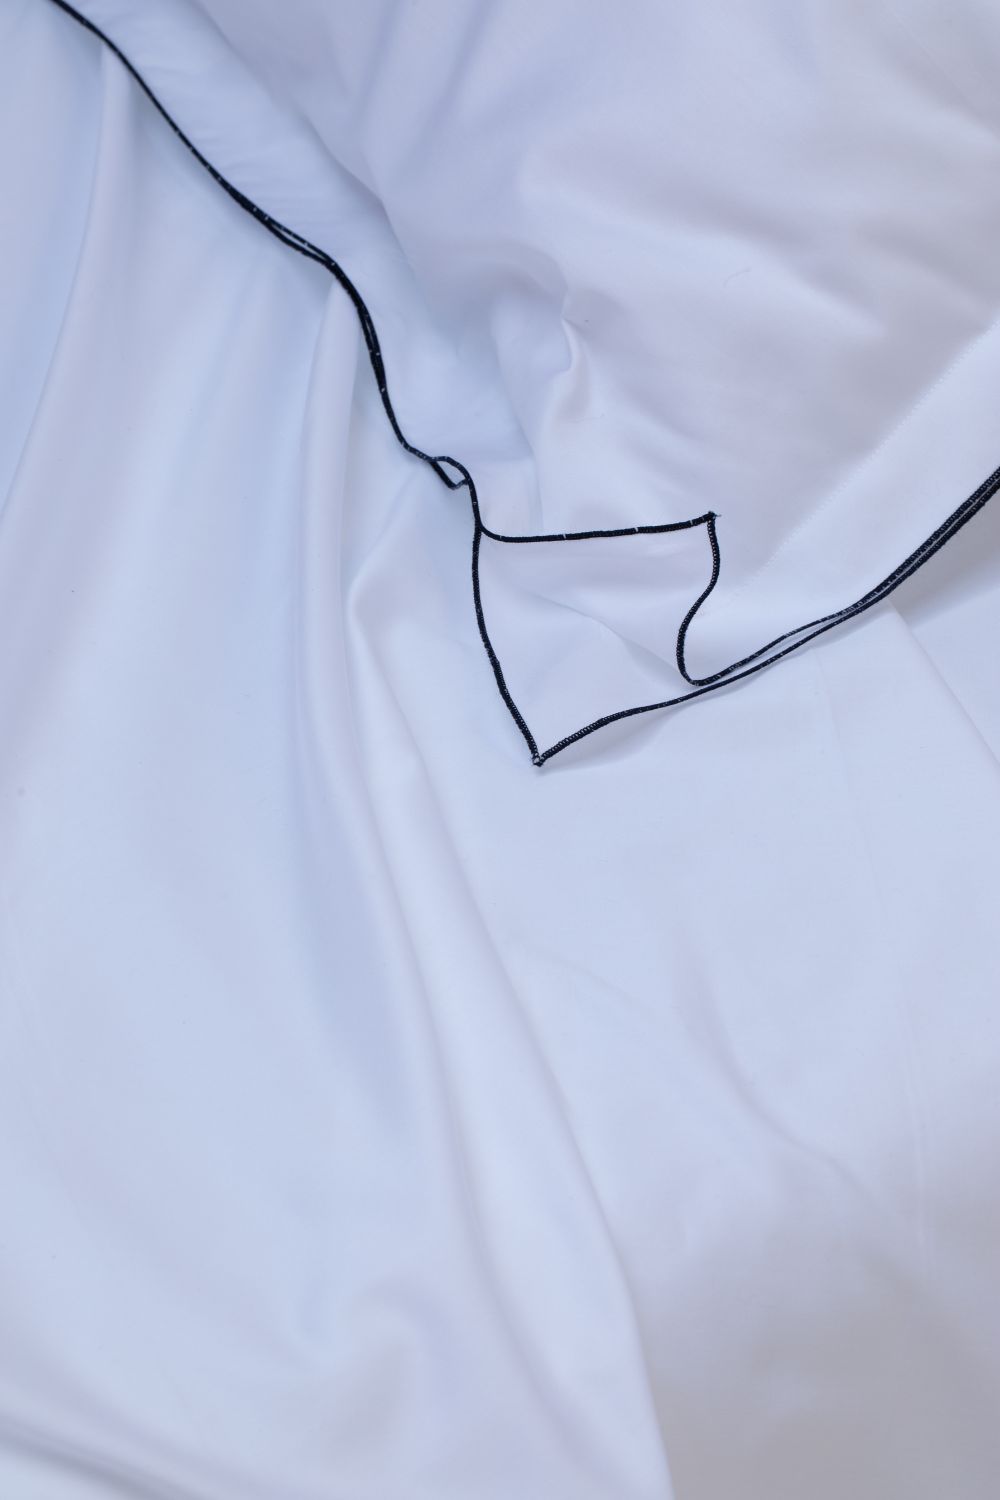 LUCINA Flat top sheet in pure cotton satin with rolled hem